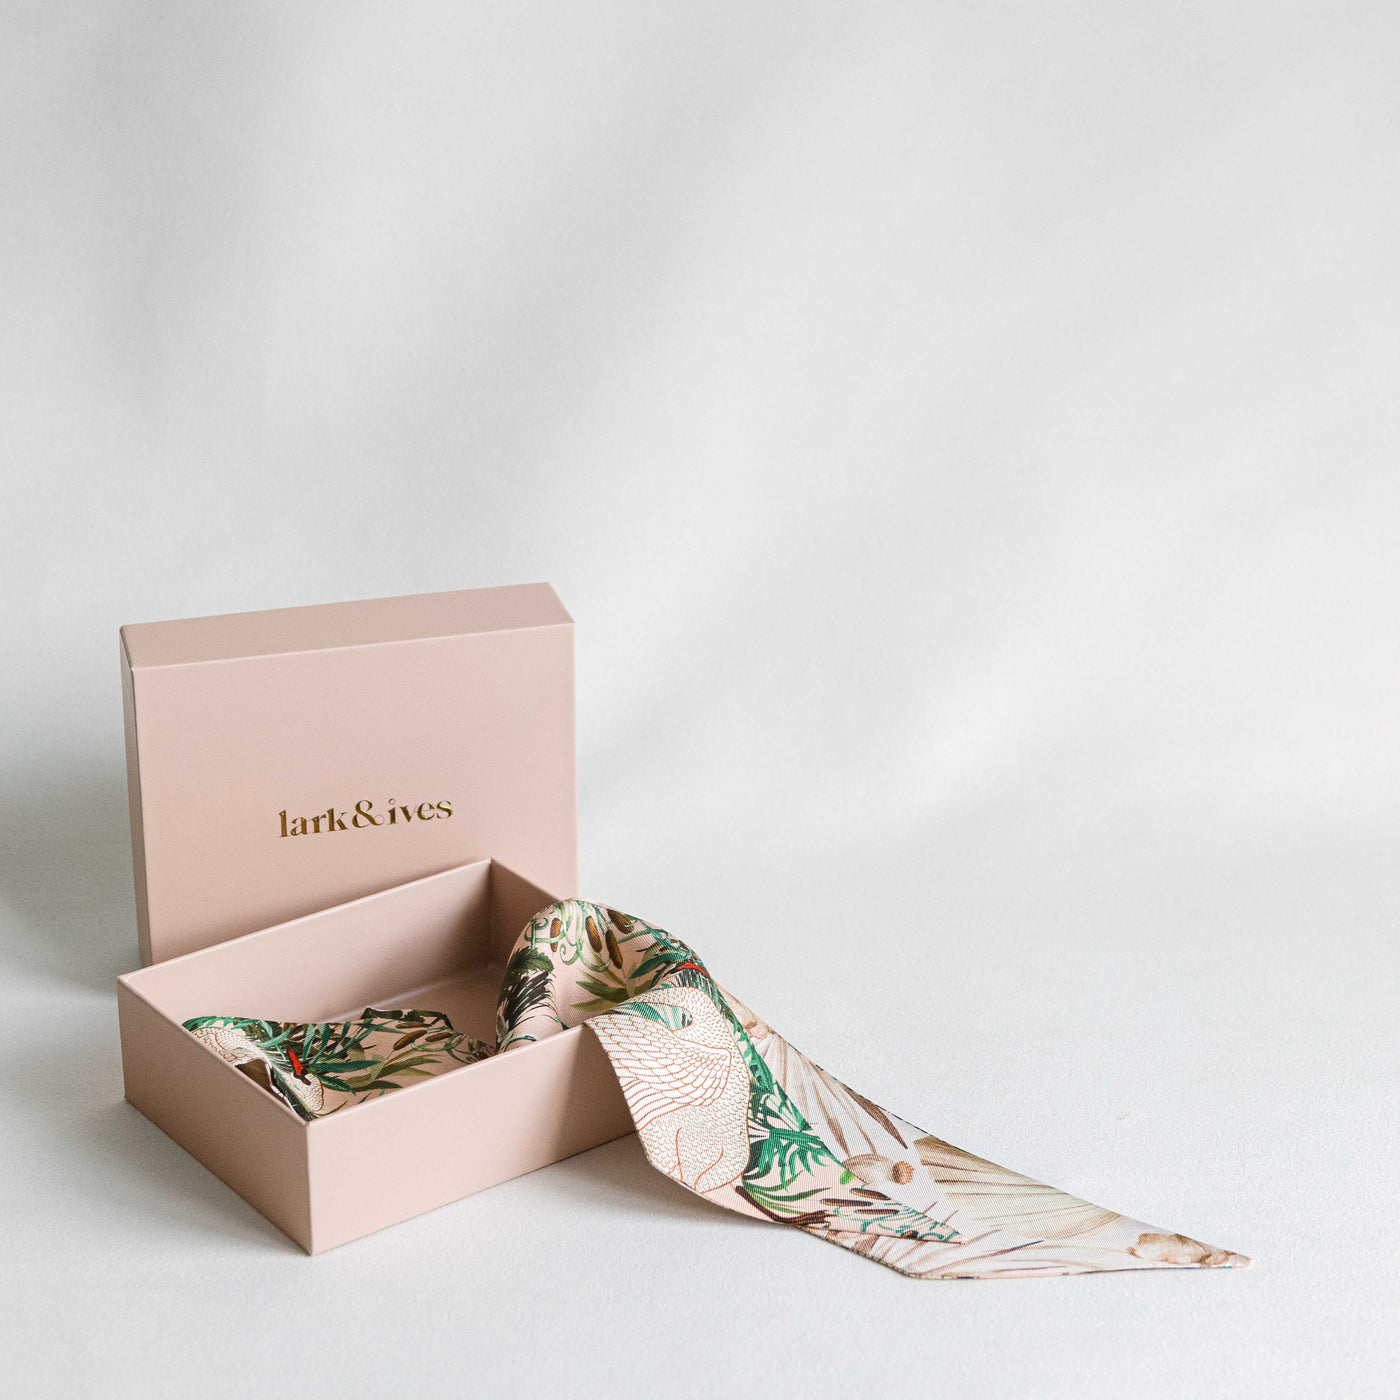 Lark and Ives / Silk Scarf / Twilly Scarf / Thin Scarf / Purse Accessories / Hair Accessories / Swan and Floral Print